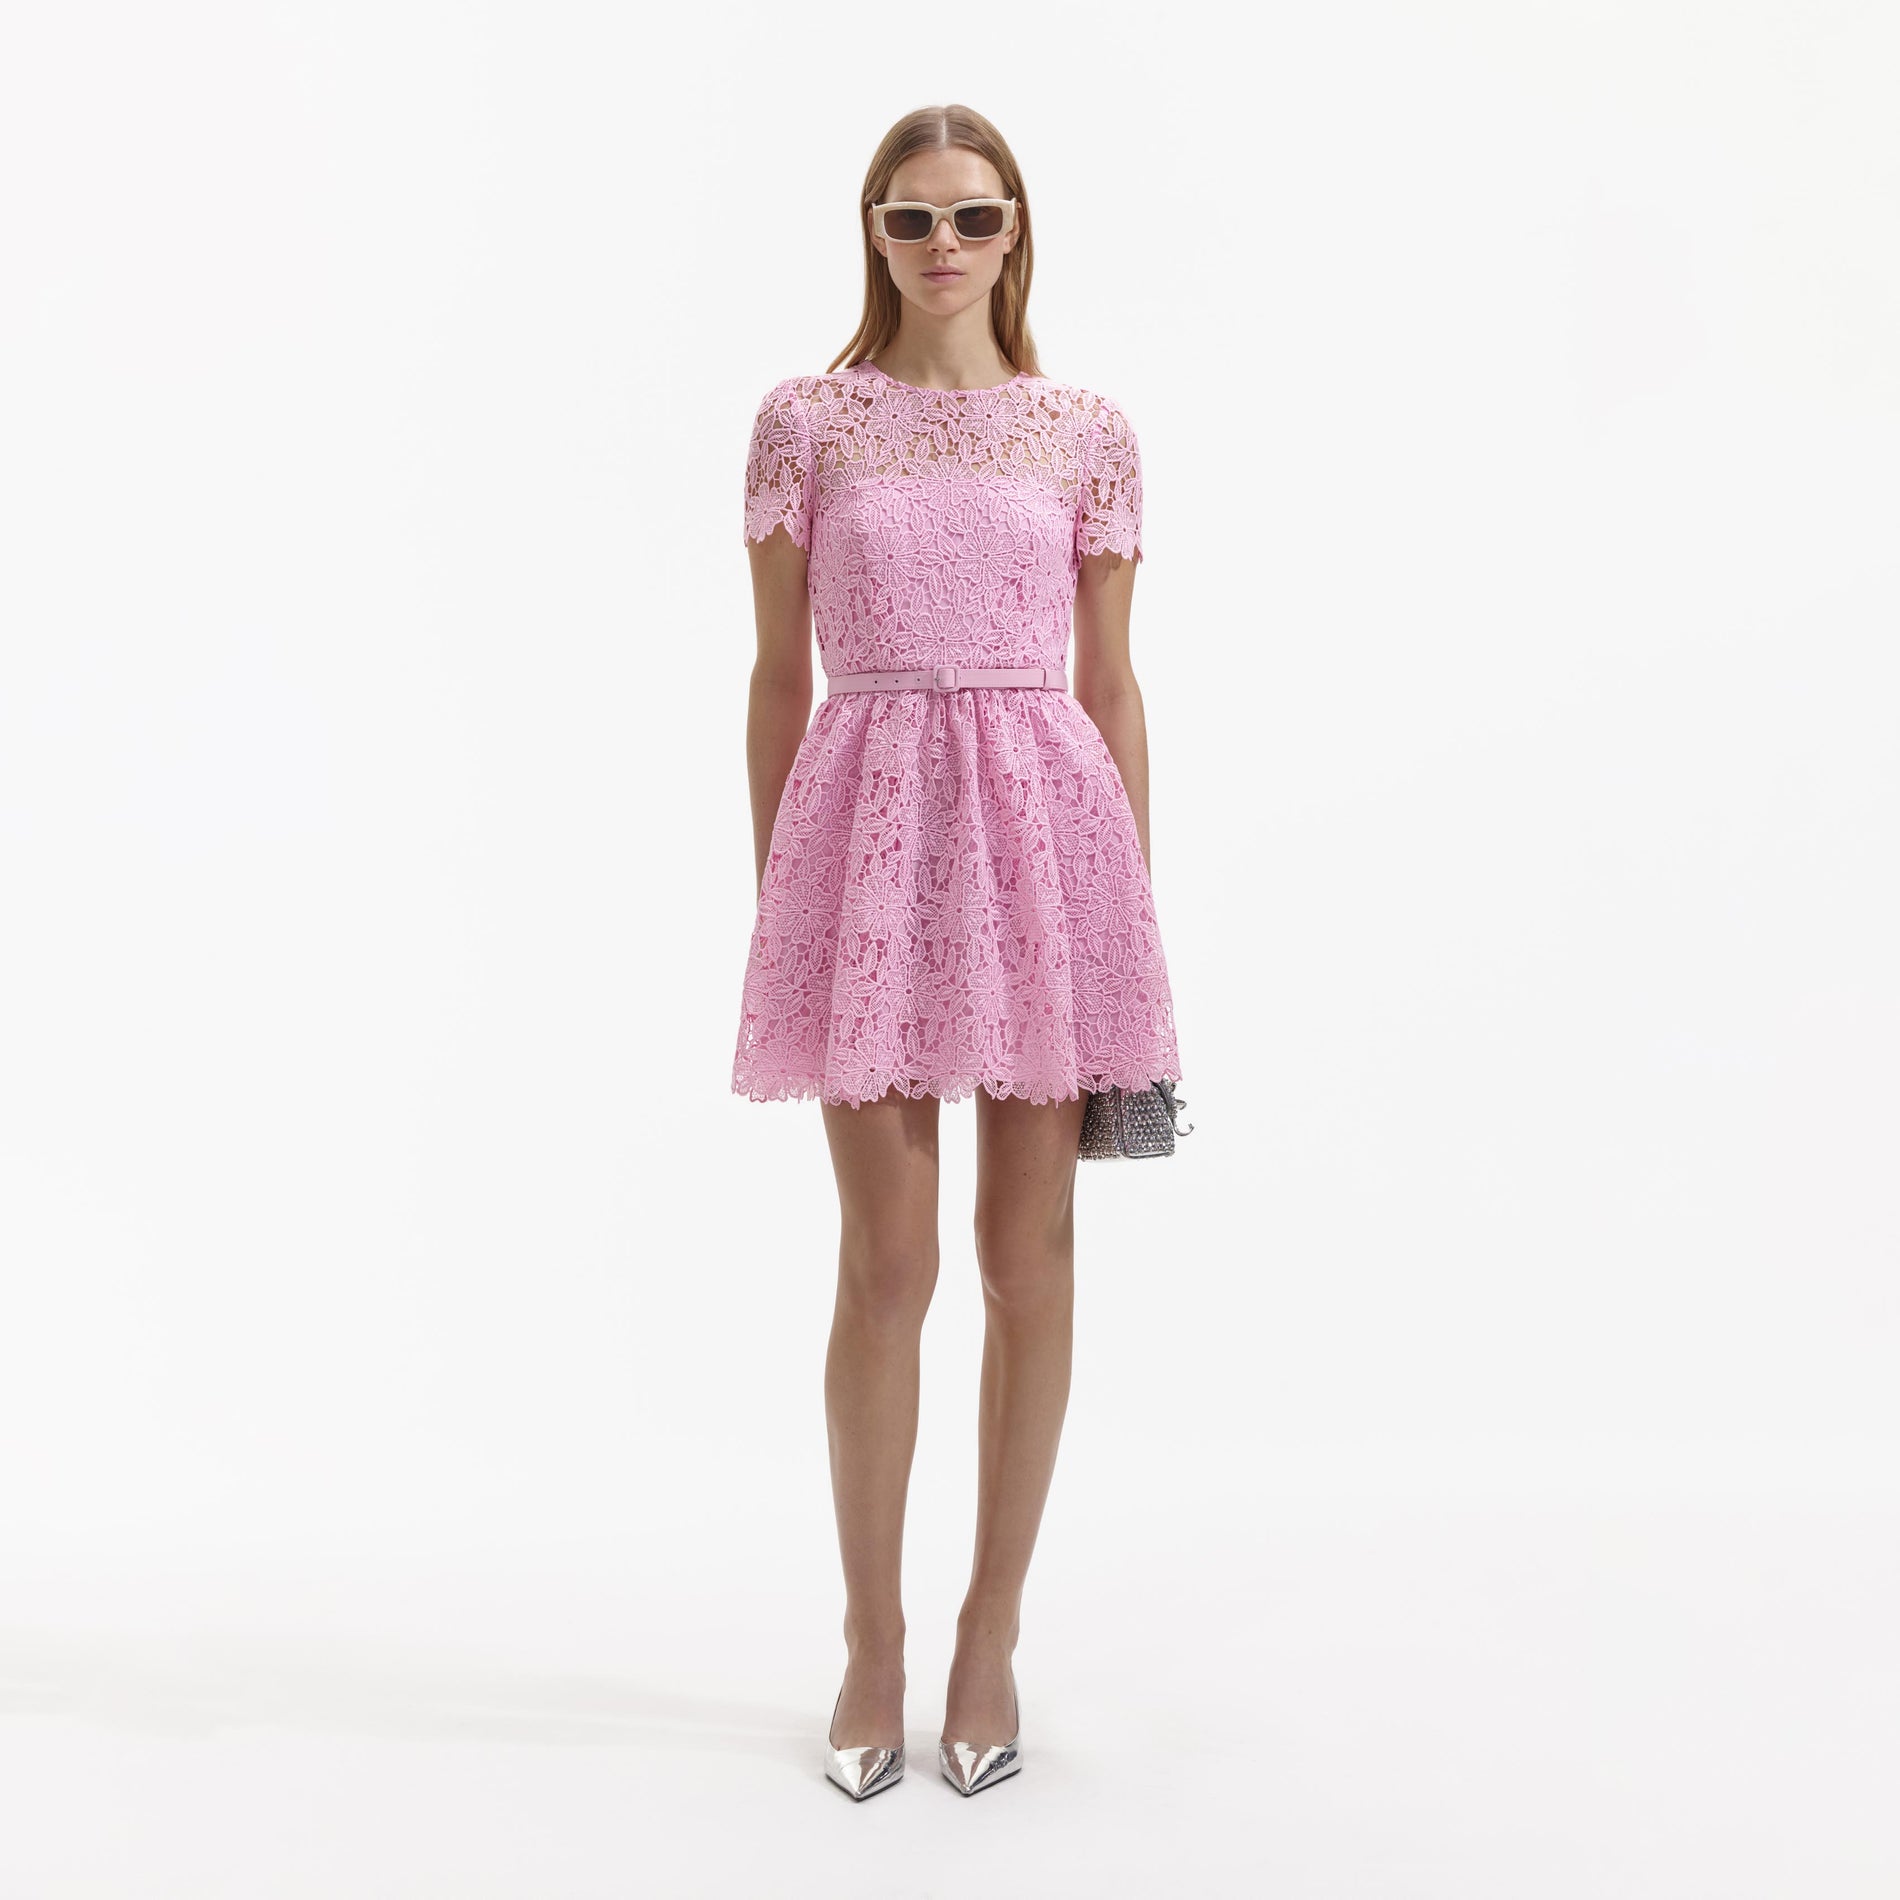 A Woman wearing the Pink Guipure Lace High Neck Mini Dress